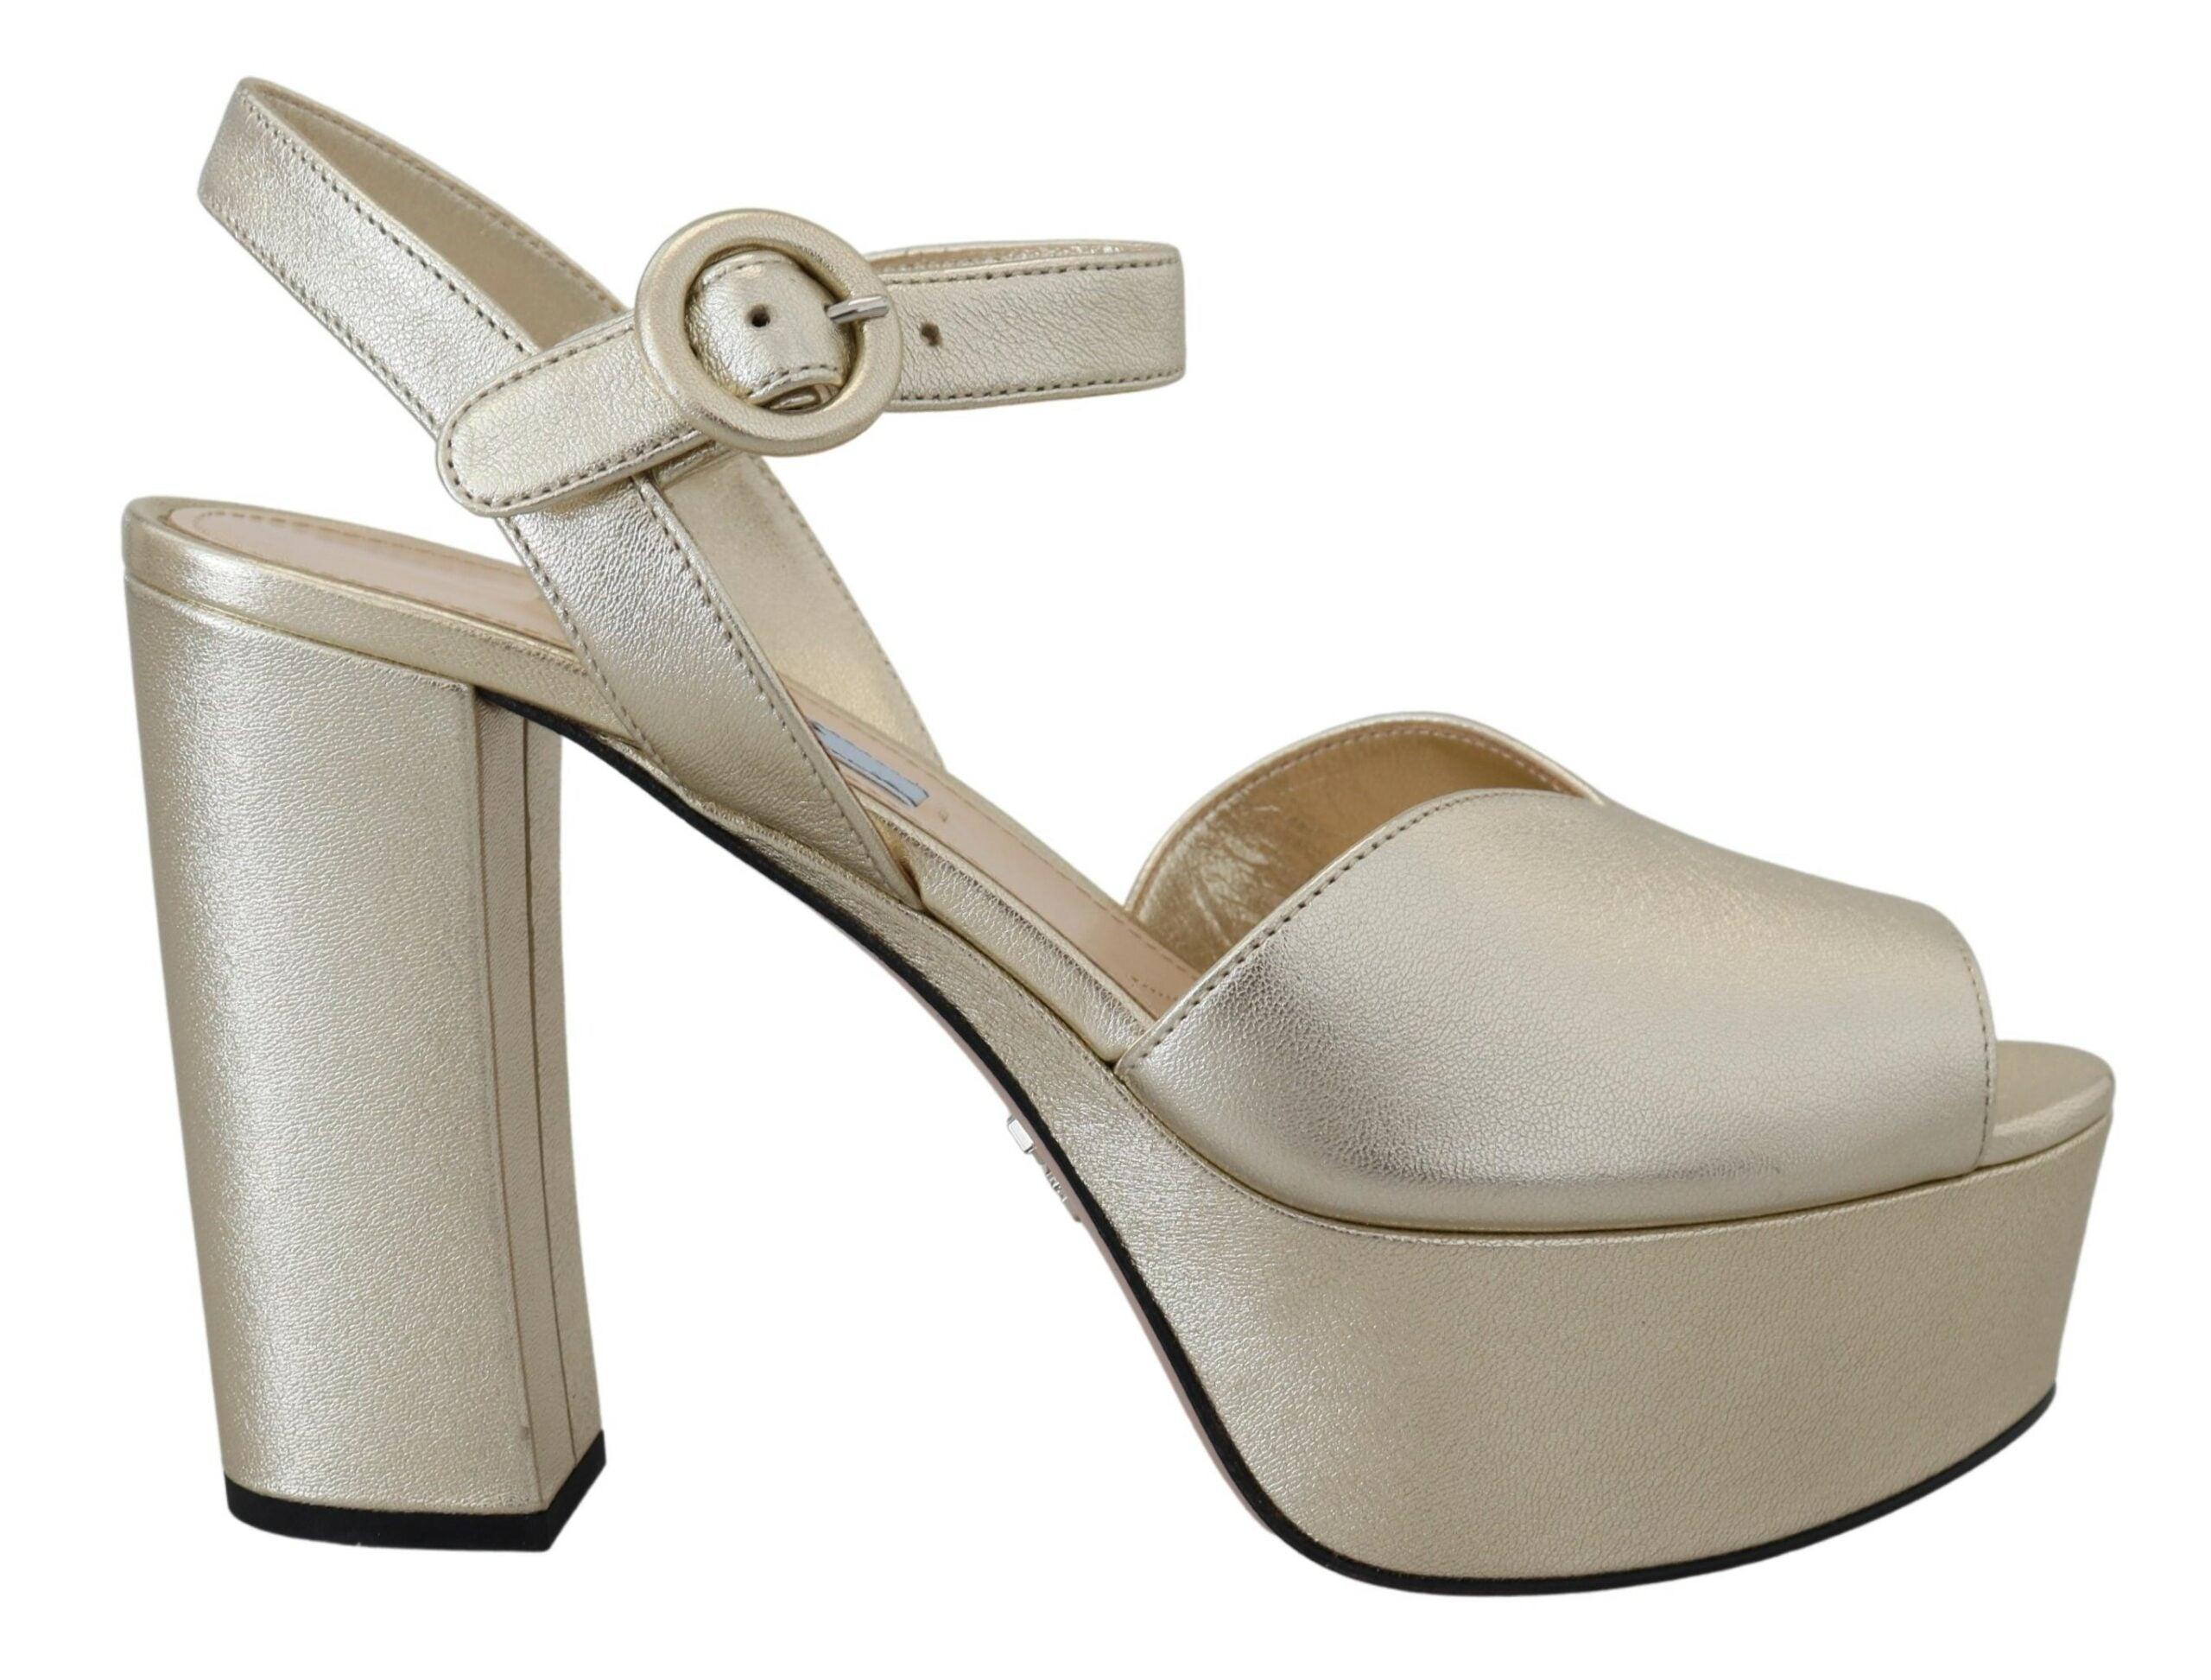 Prada Gold Nappa Leather Sandals Ankle Strap Heels Shoes in Metallic | Lyst